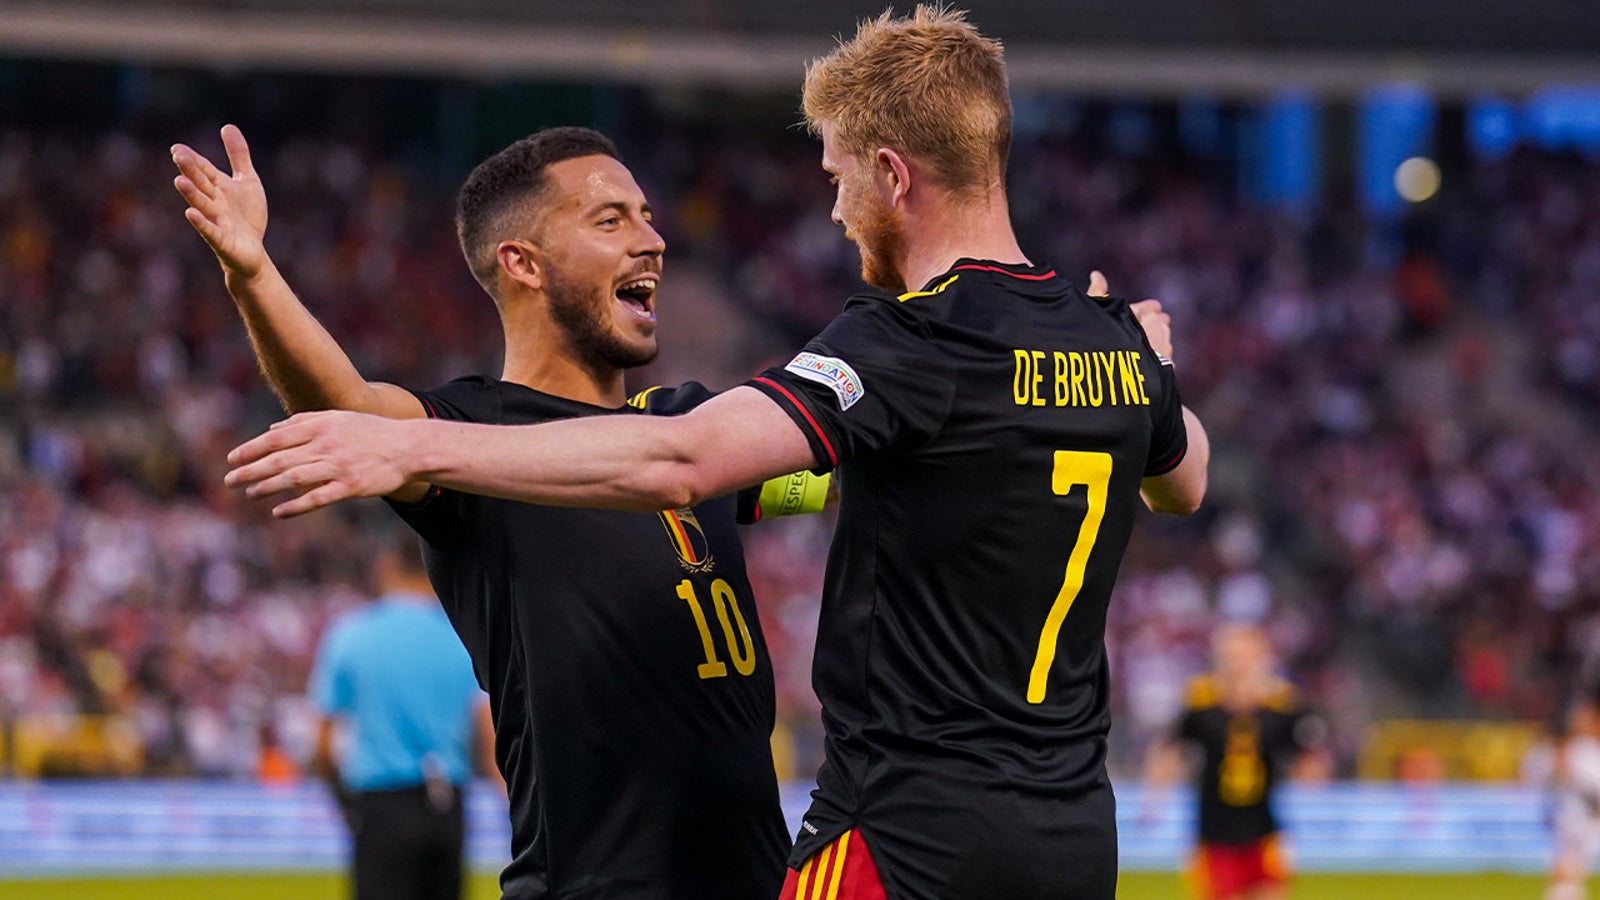 Belgium's defining statement in victory over Poland